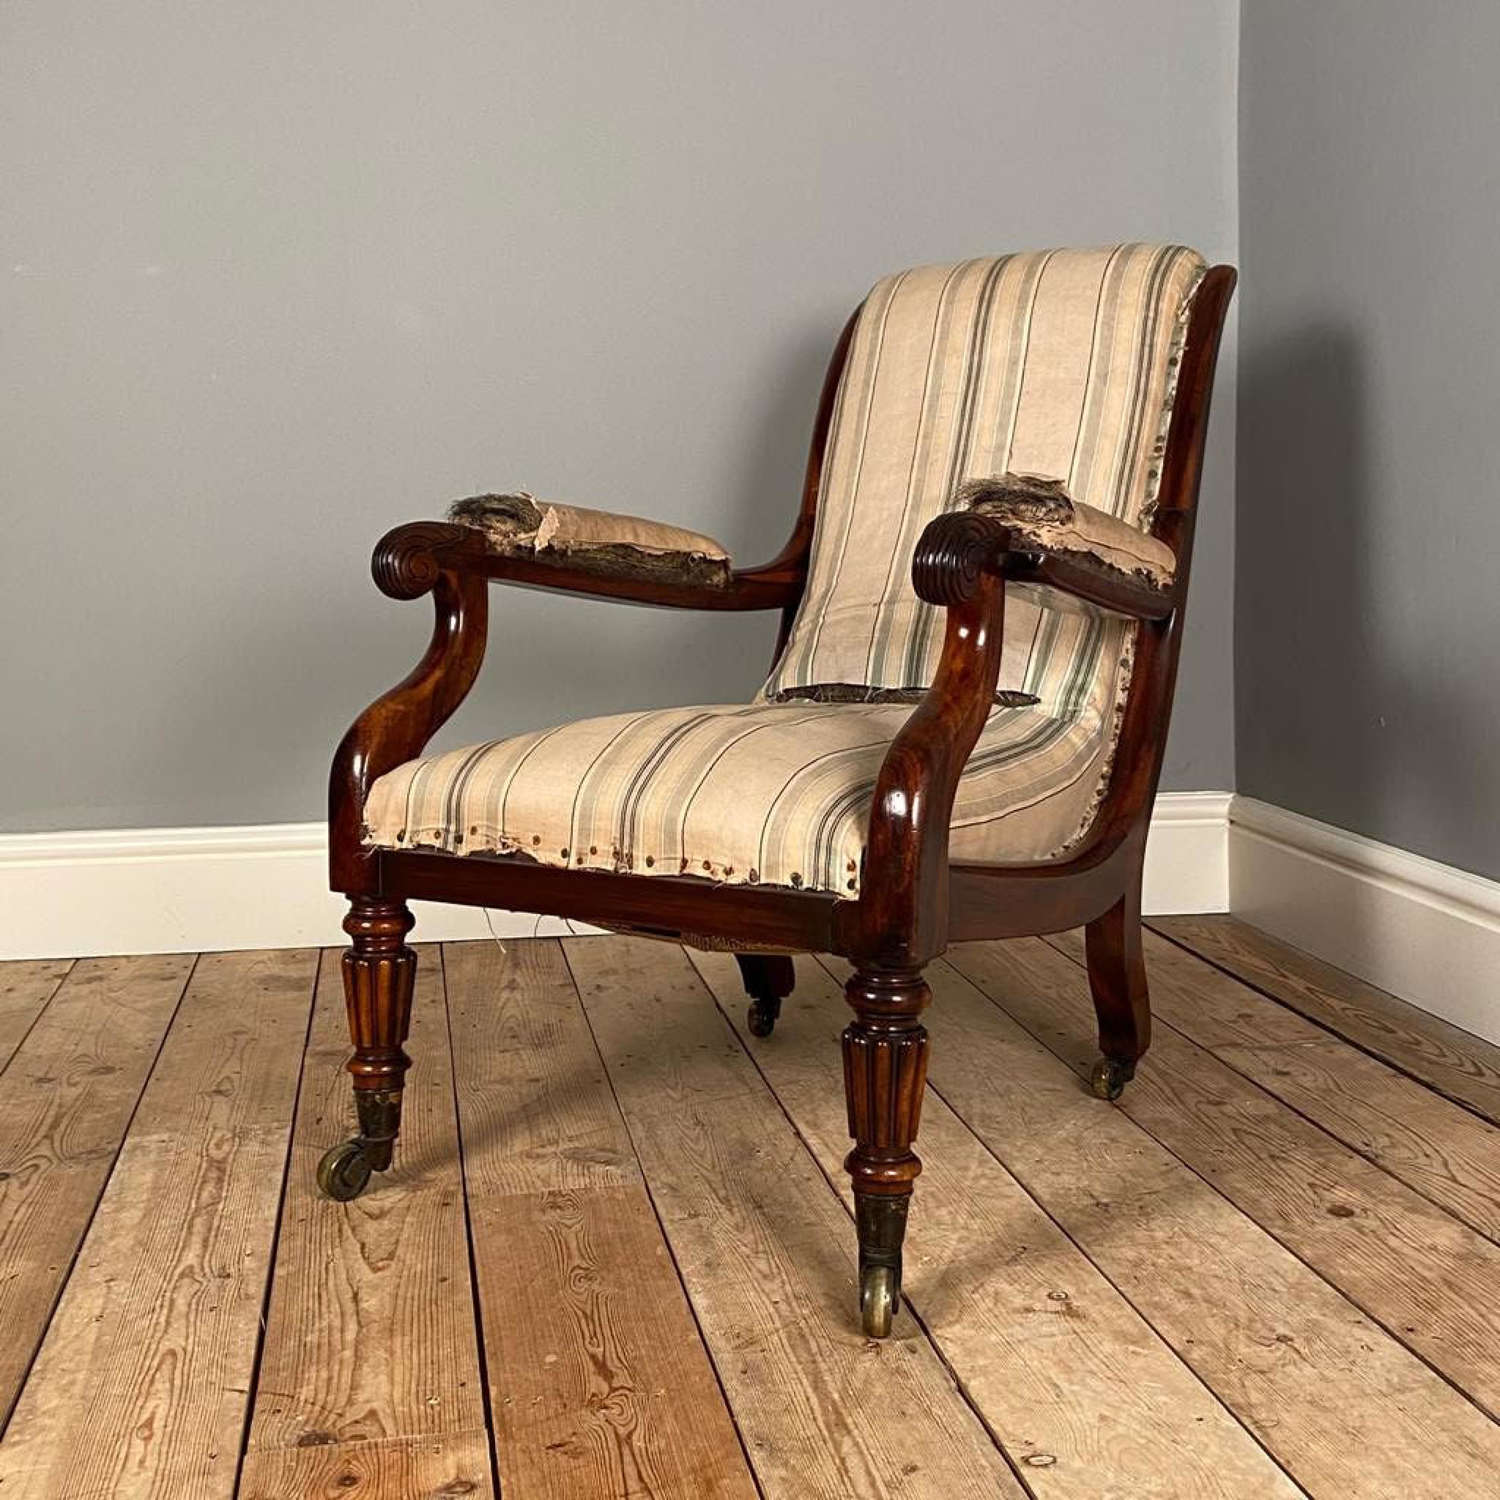 Gillows Goncalo Alves Bedroom Chair